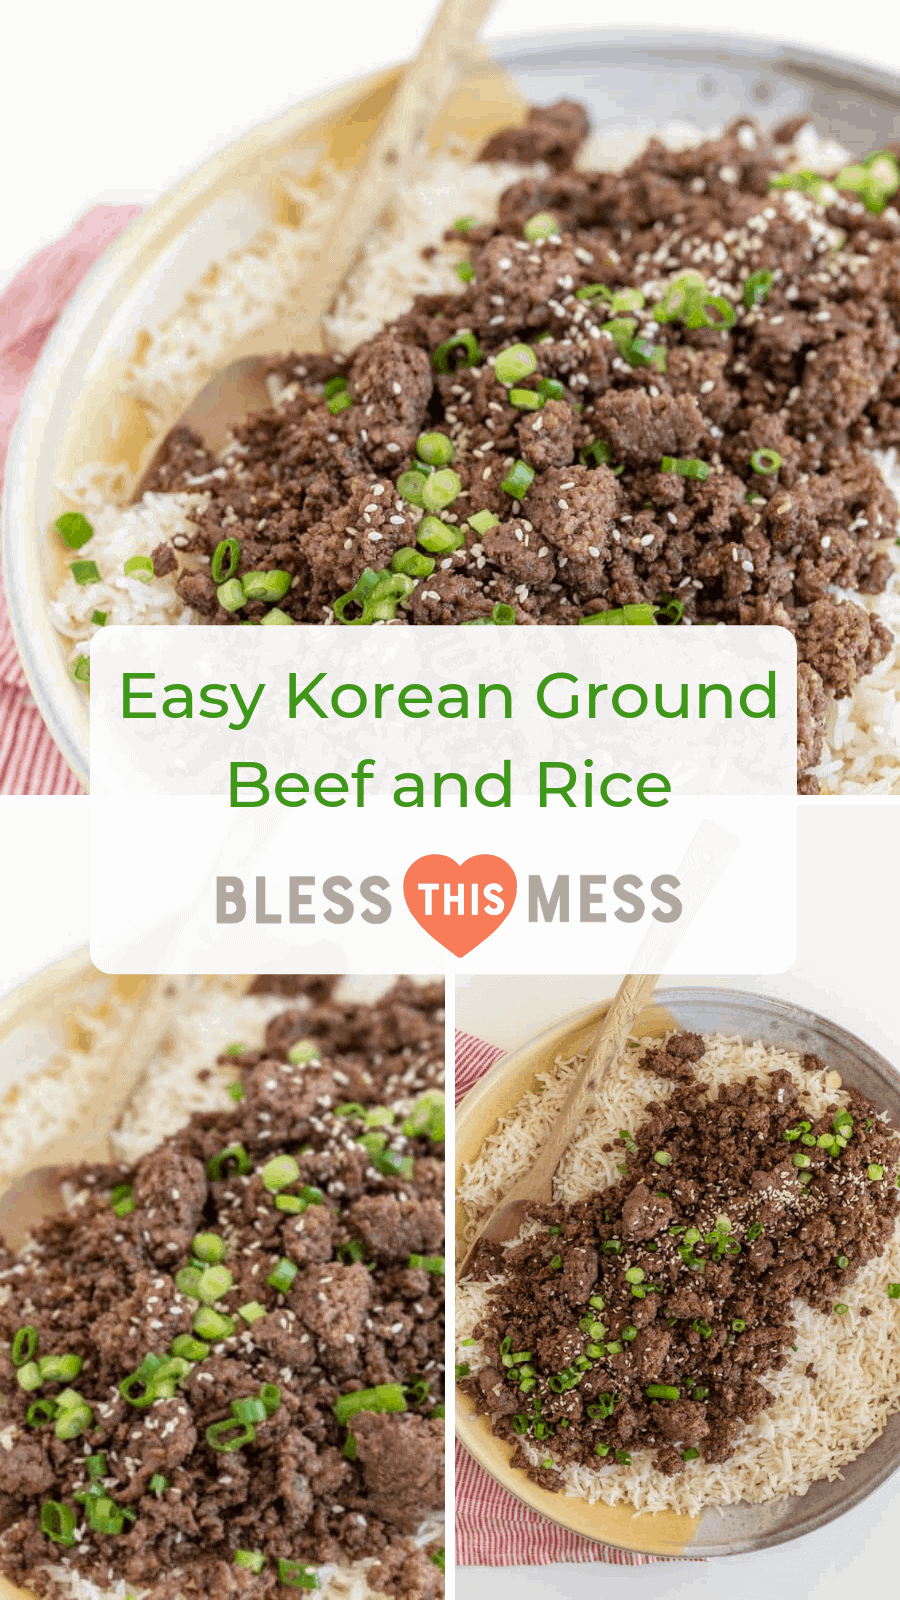 Super flavorful and simple to toss together, Easy Korean Ground Beef and Rice is a staple weeknight meal that the whole family will love. 